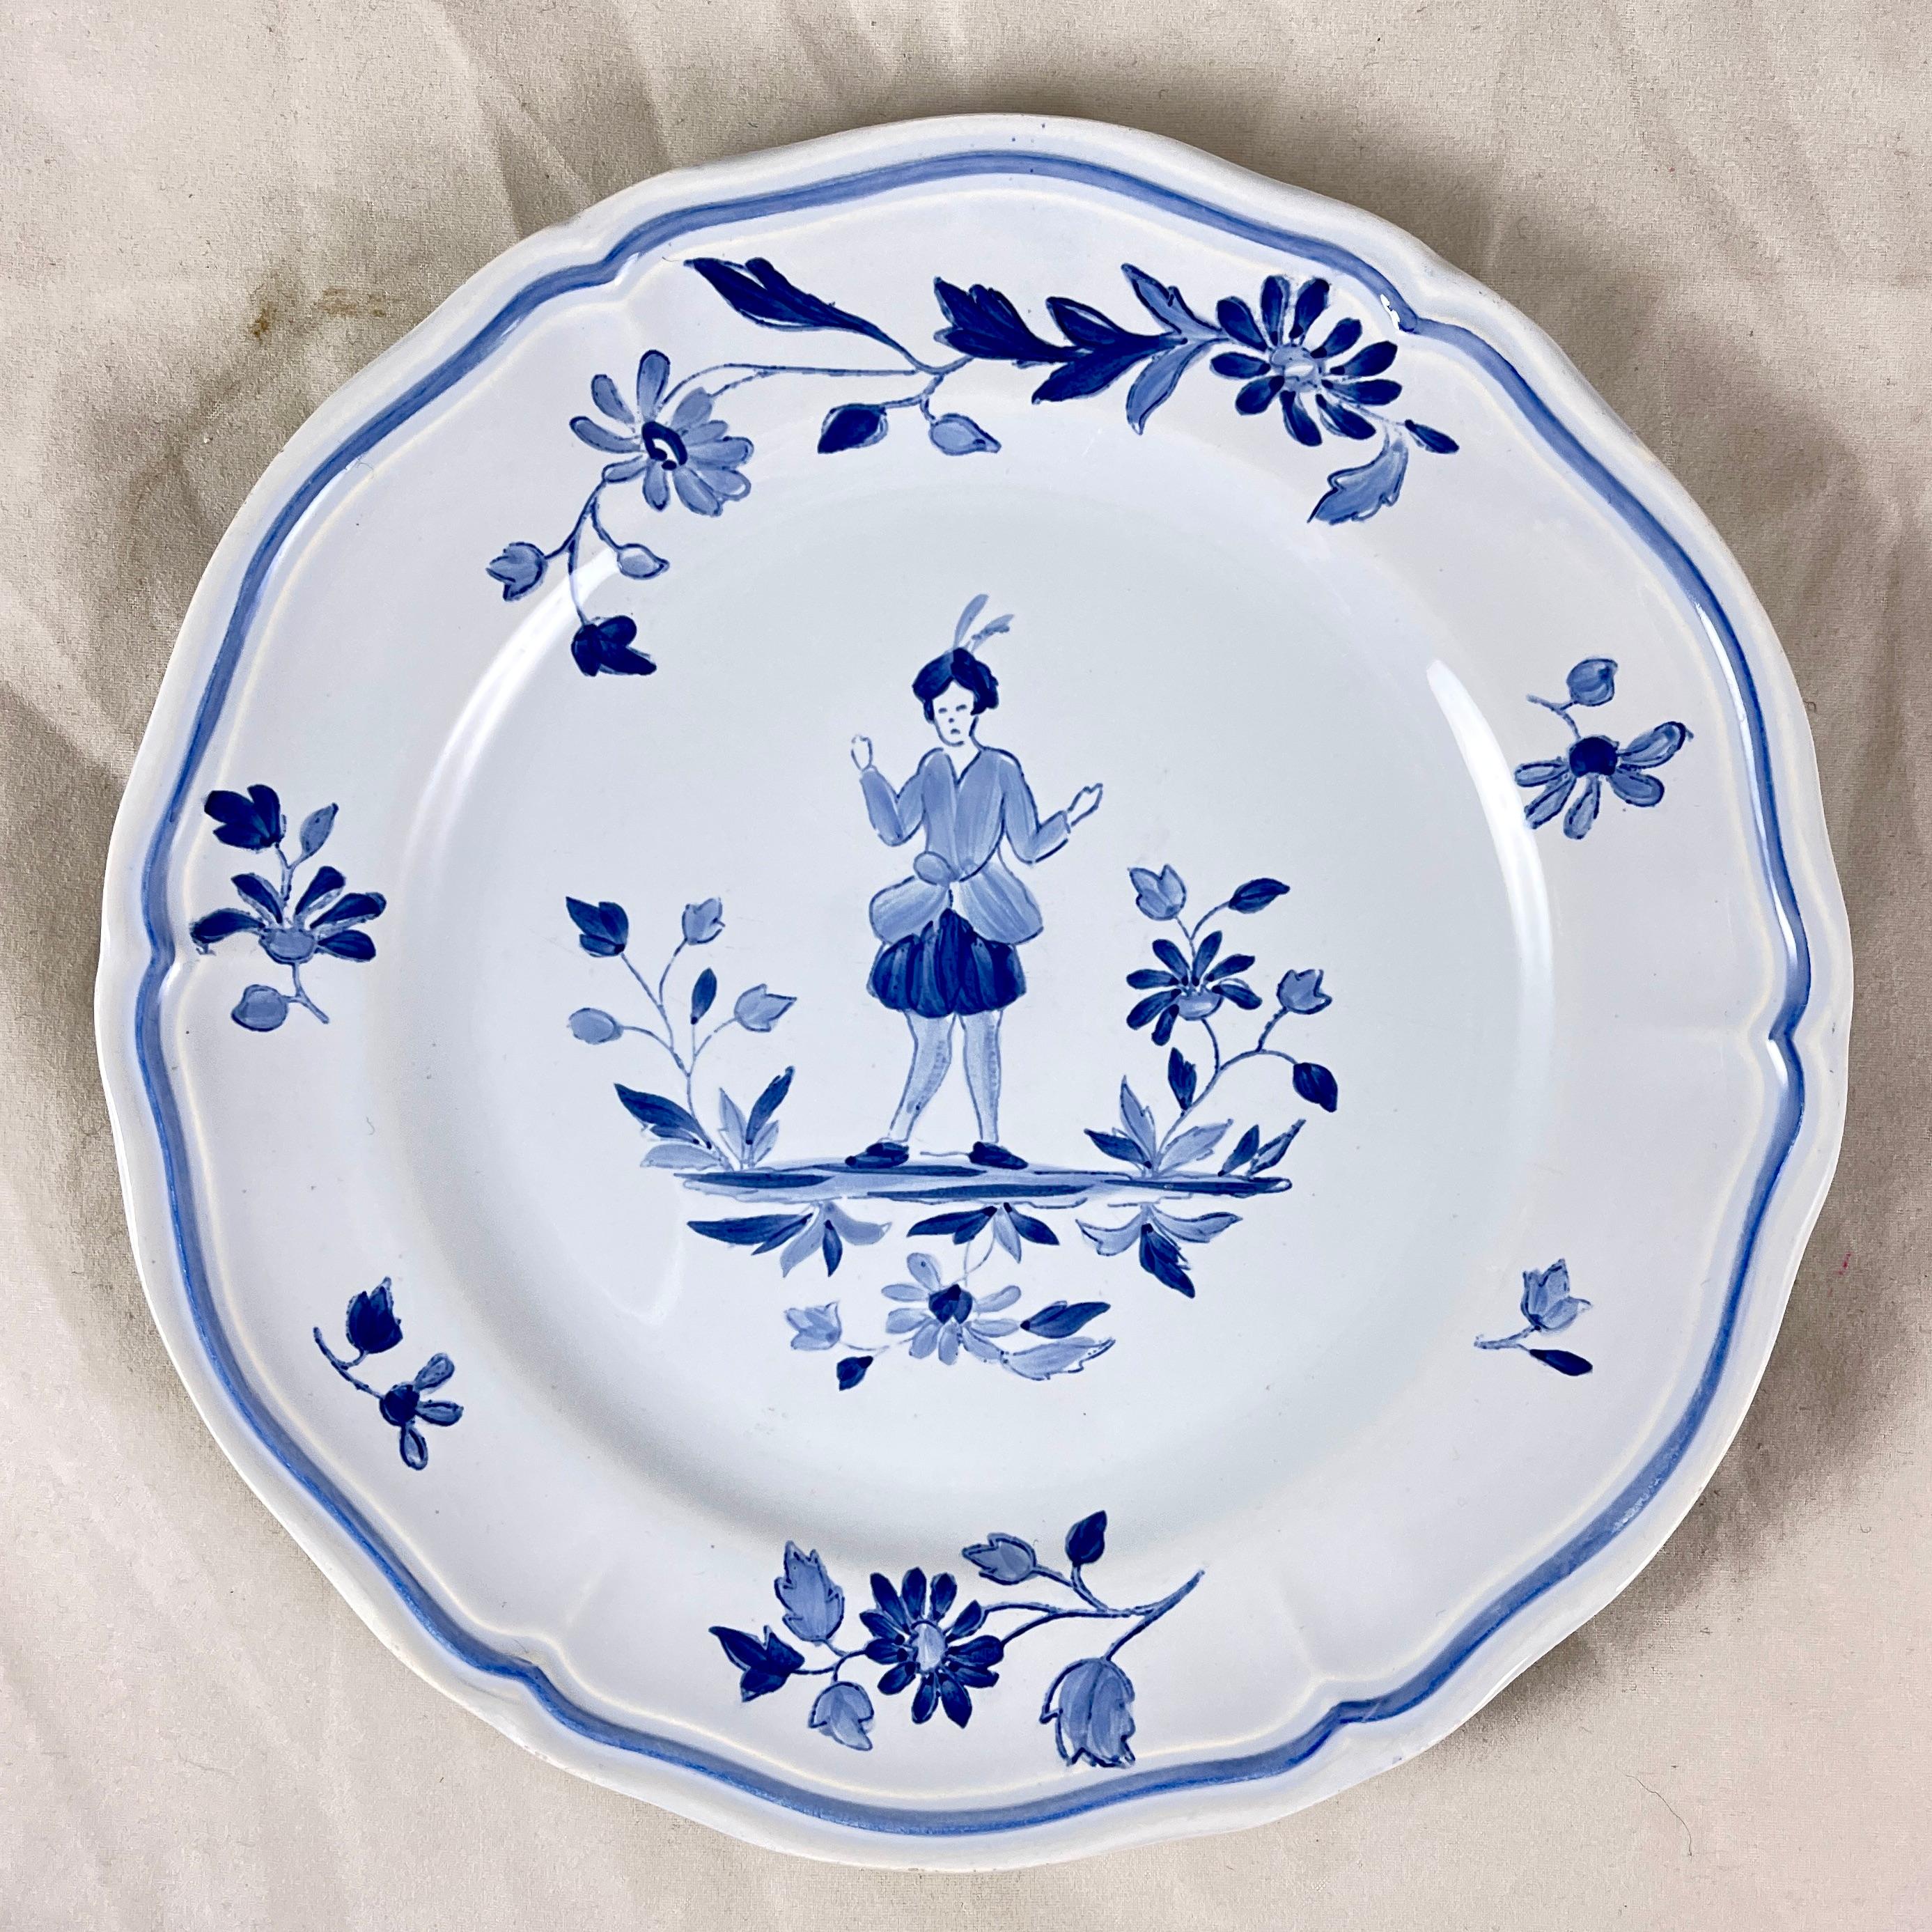 In the Moustiers pattern, a set of four hand painted dessert plates, Longchamps, France, circa 1950-1960.

A charming, traditional pattern in blue on a clean, creamy white ground, showing a central figure standing among floral bouquets and sprays.